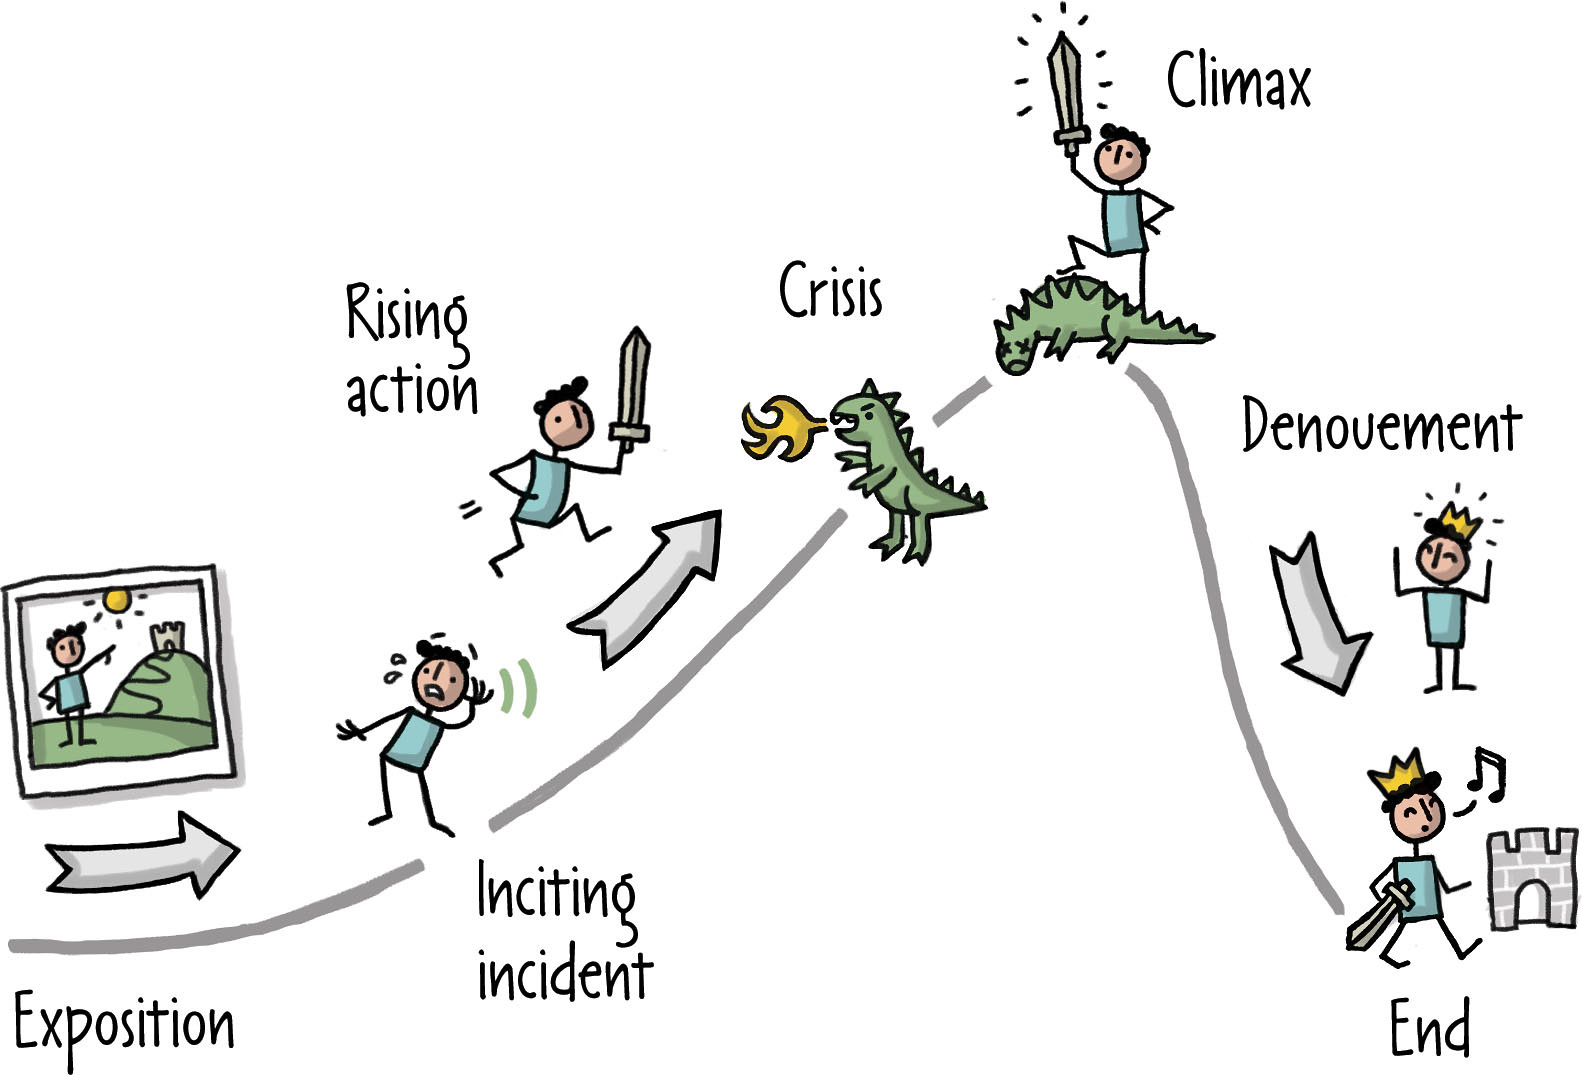 A graphic representation of the story arc as a little stick figure knight climbs a hill from exposition, inciting incident, rising action and crisis to besting a fire breathing dragon at the climax and then going back down the arc with the denouement and the end.